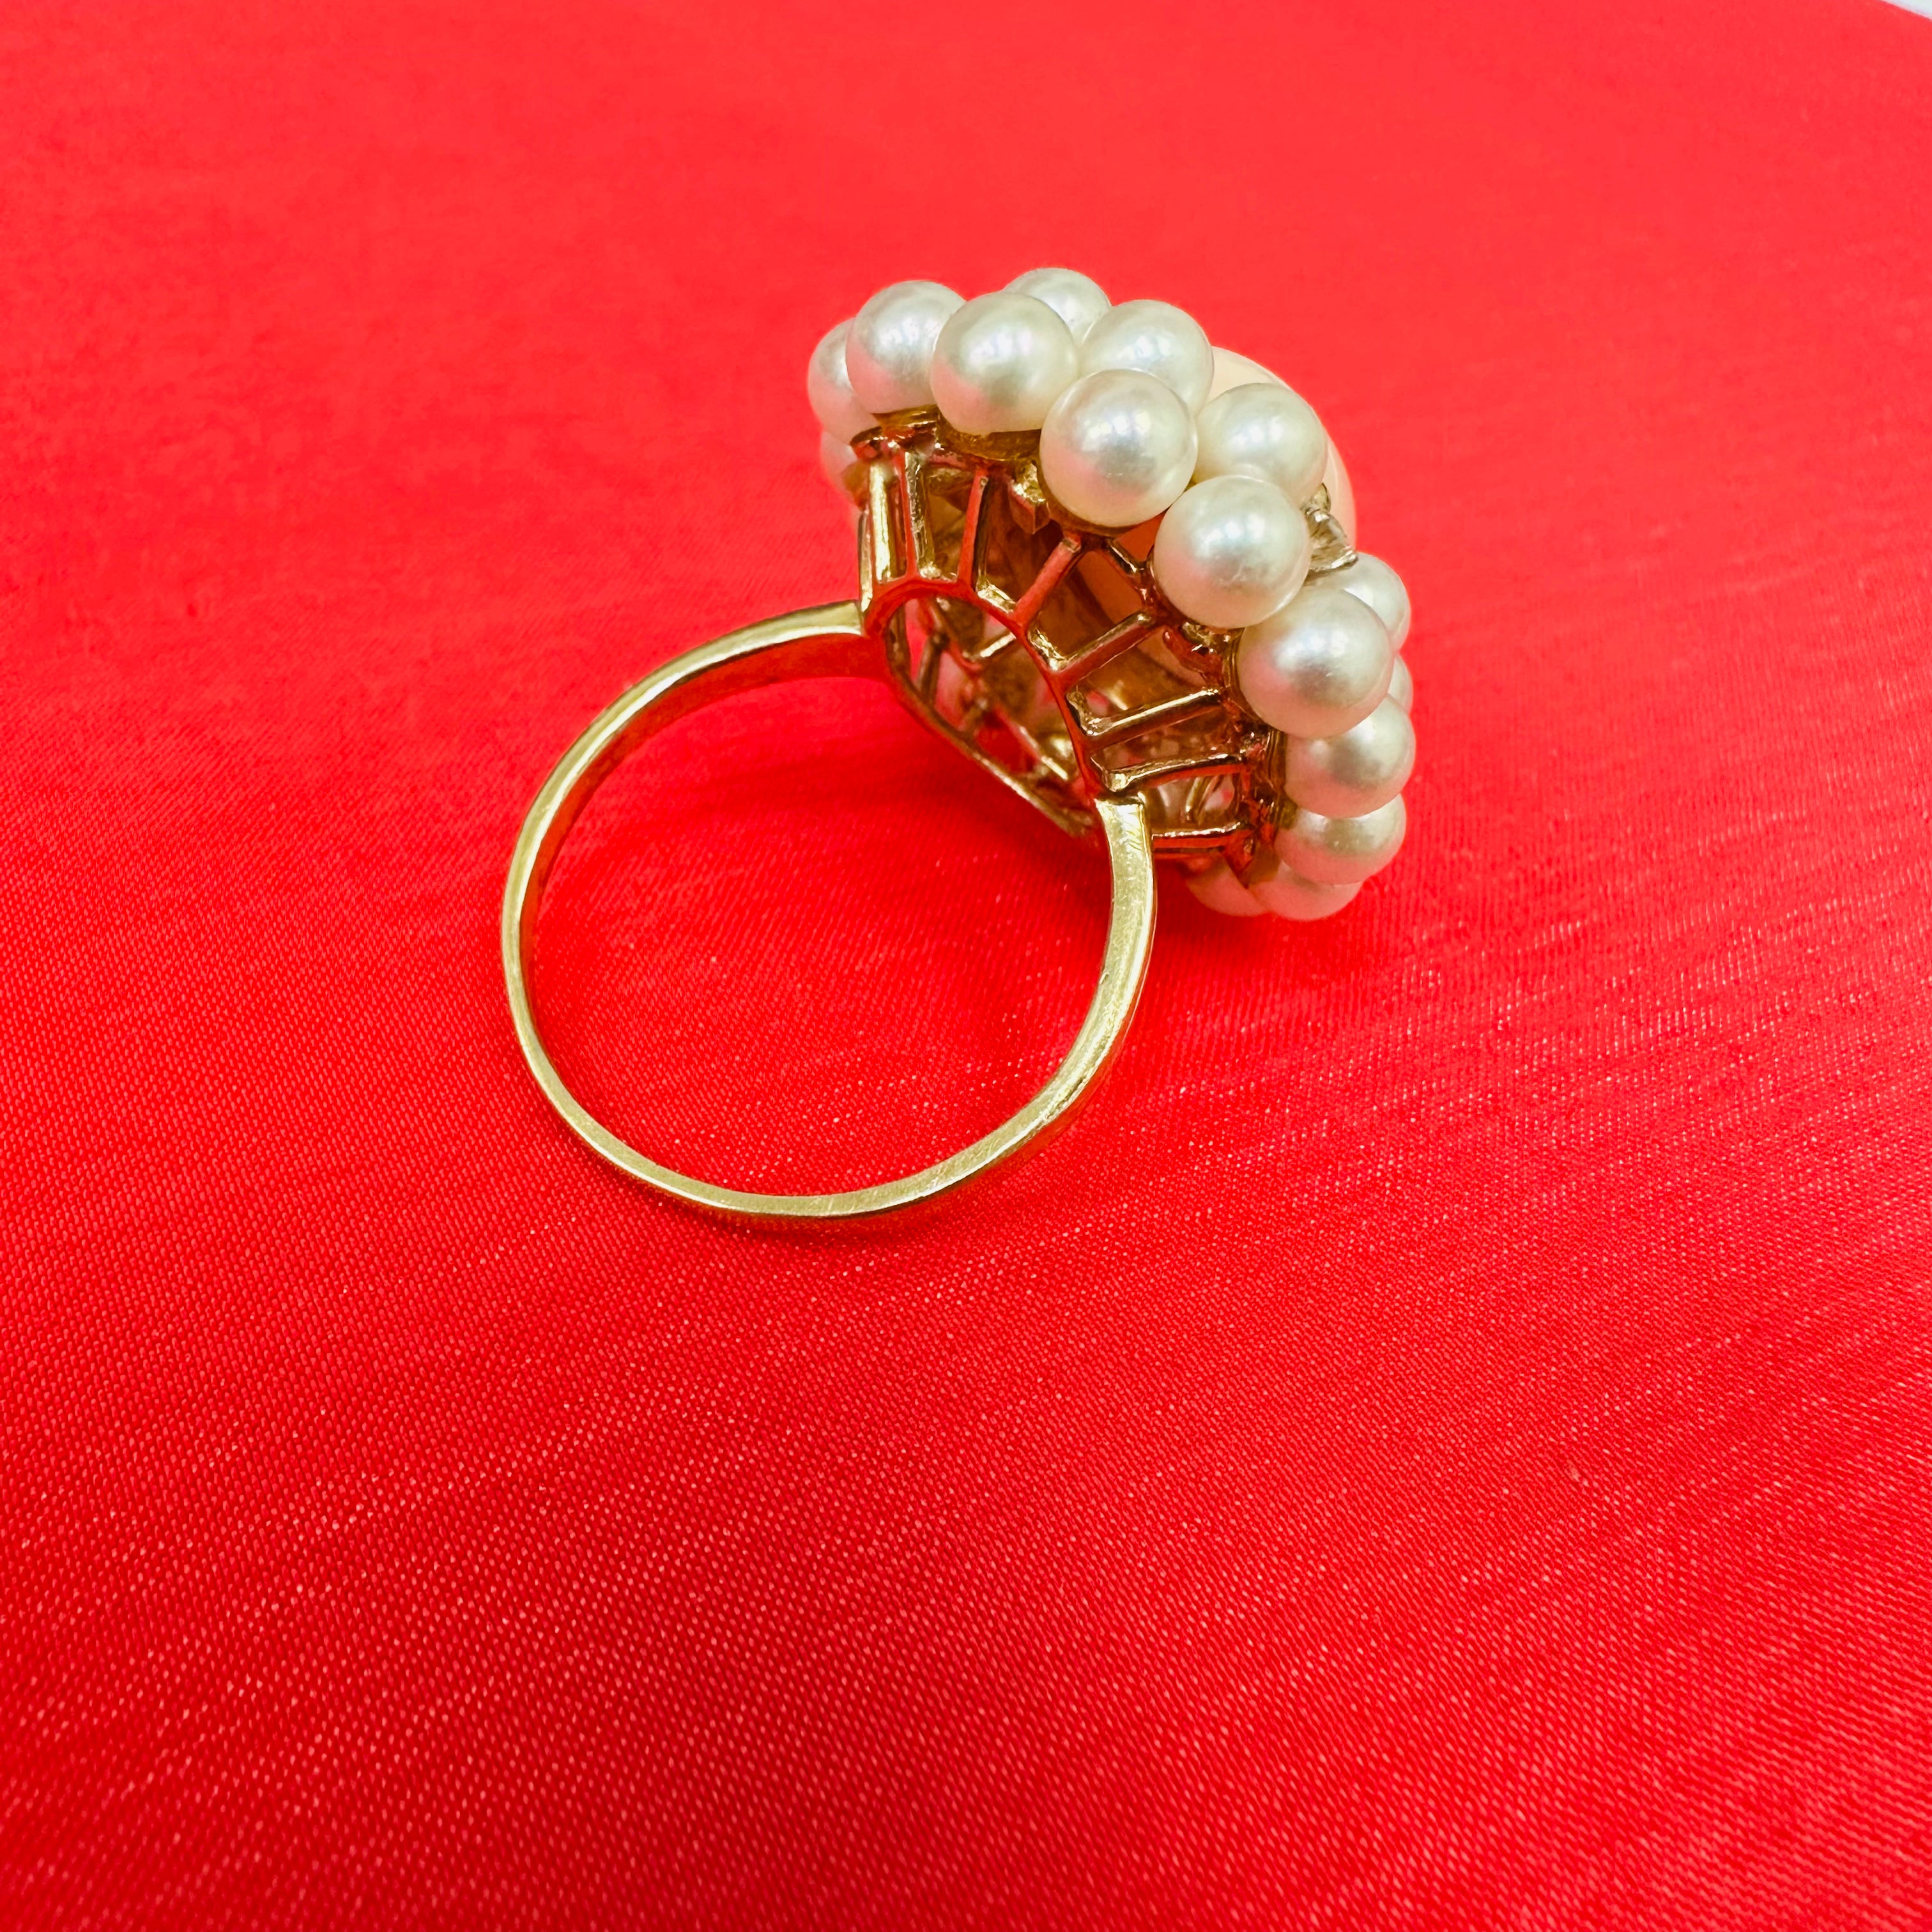 Magnificent Angelskin Coral Pearl and Diamond Halo Cocktail Ring